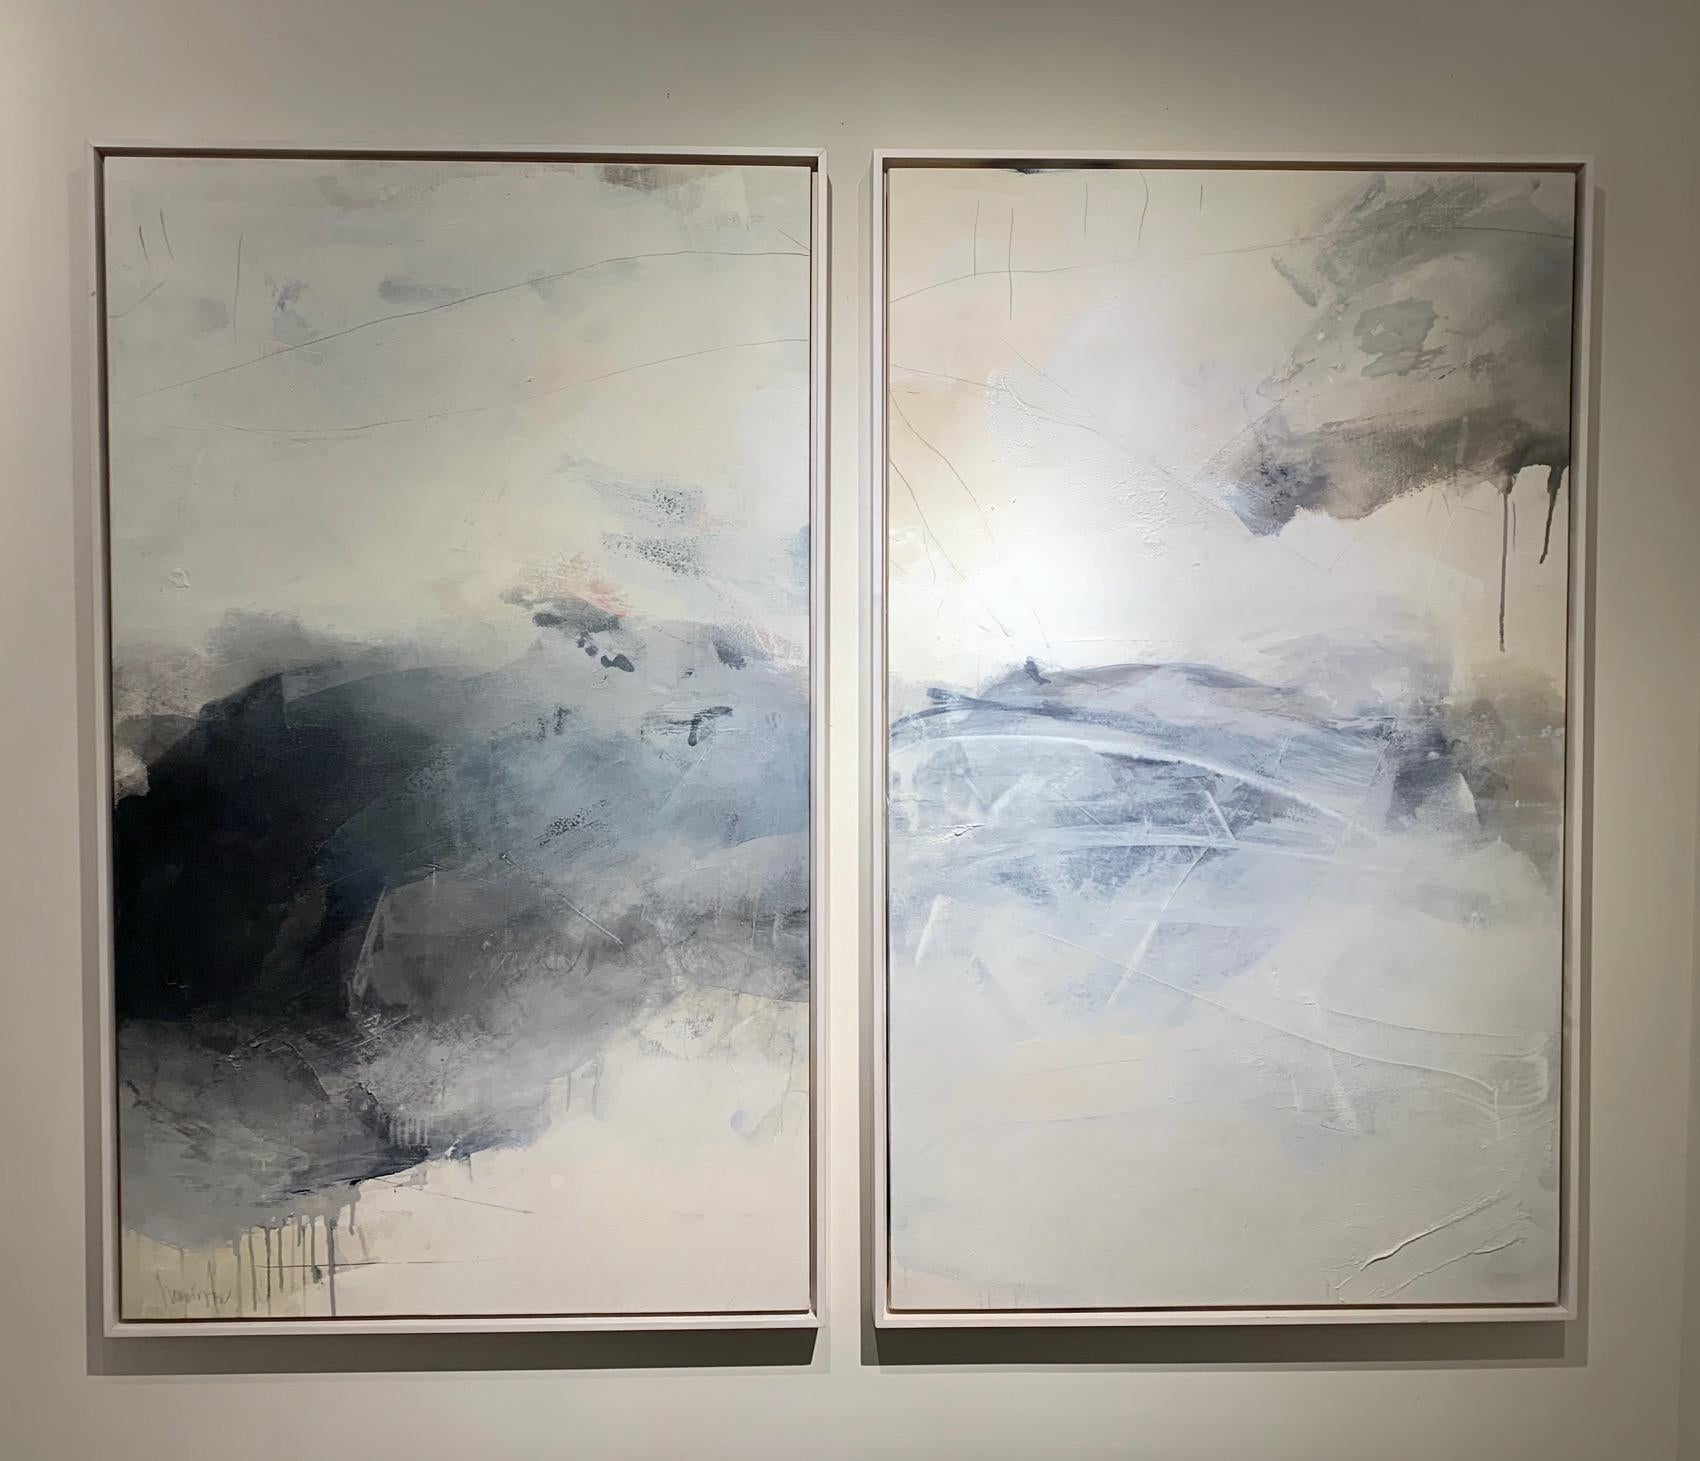 $ 8,500 is for each piece, the diptych framed with a floating frame is double the size and it is for sale at $ 15,000